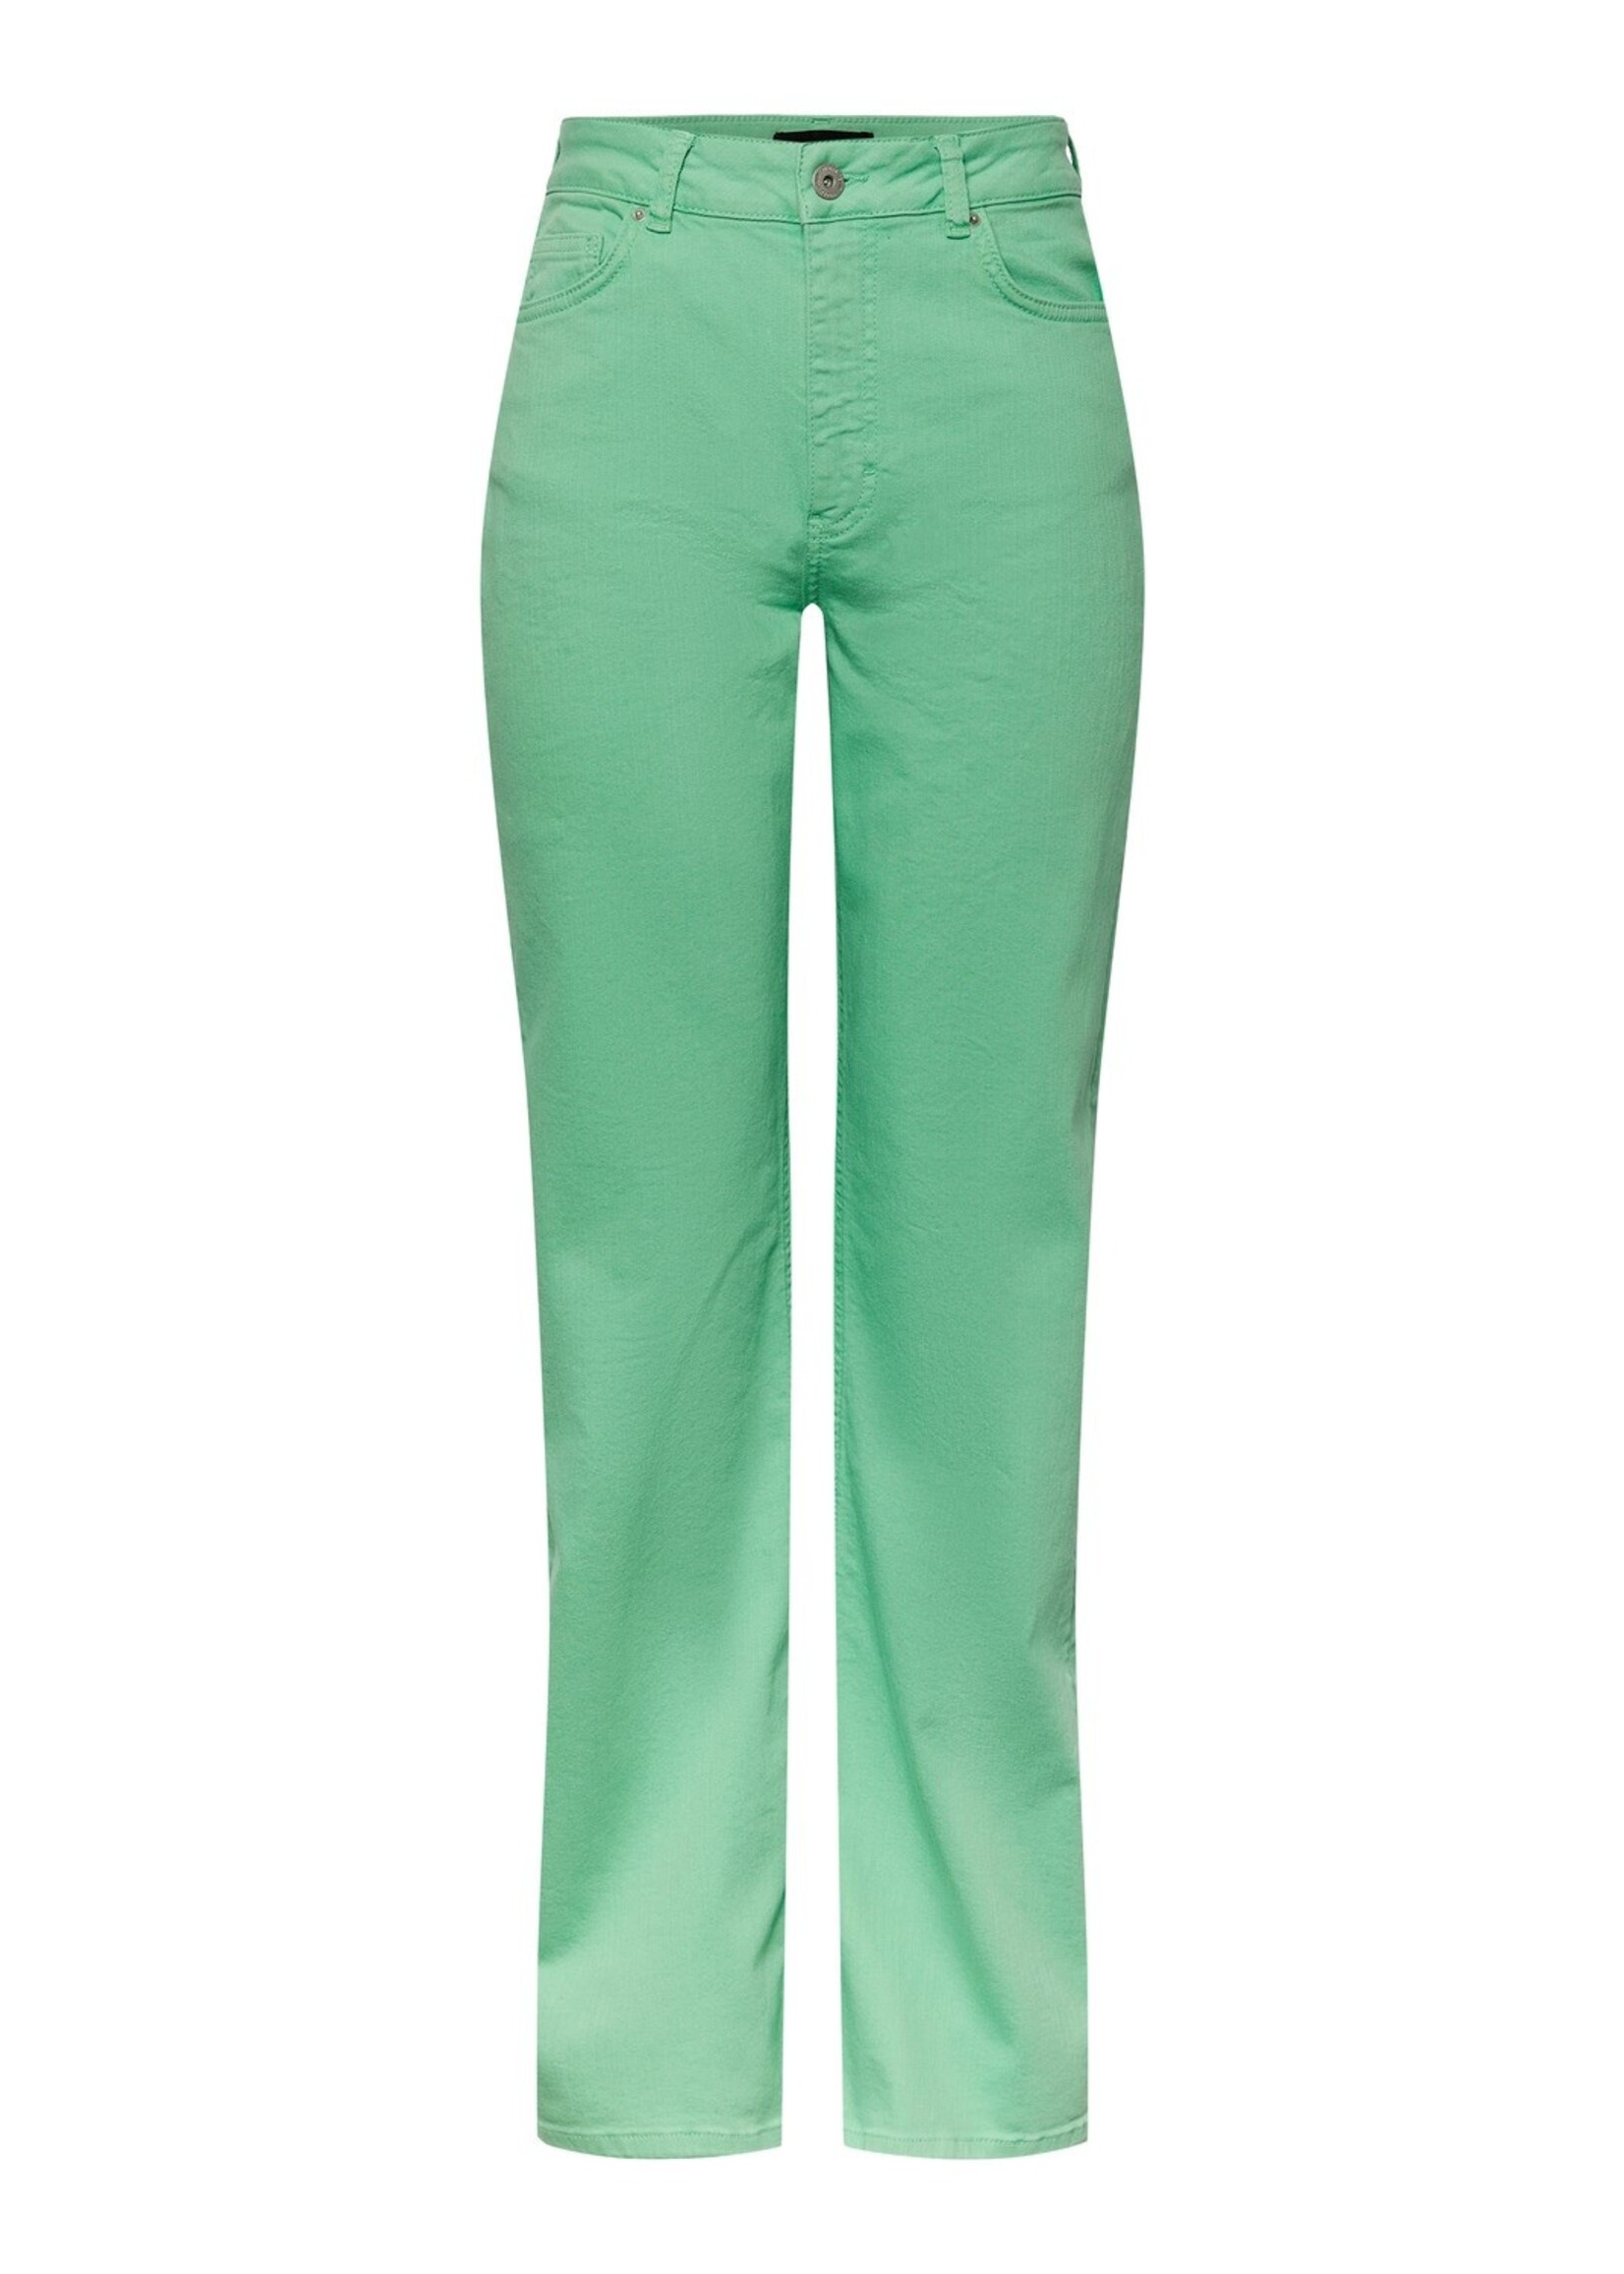 Pieces - Holly wide jeans  - Absinthe green